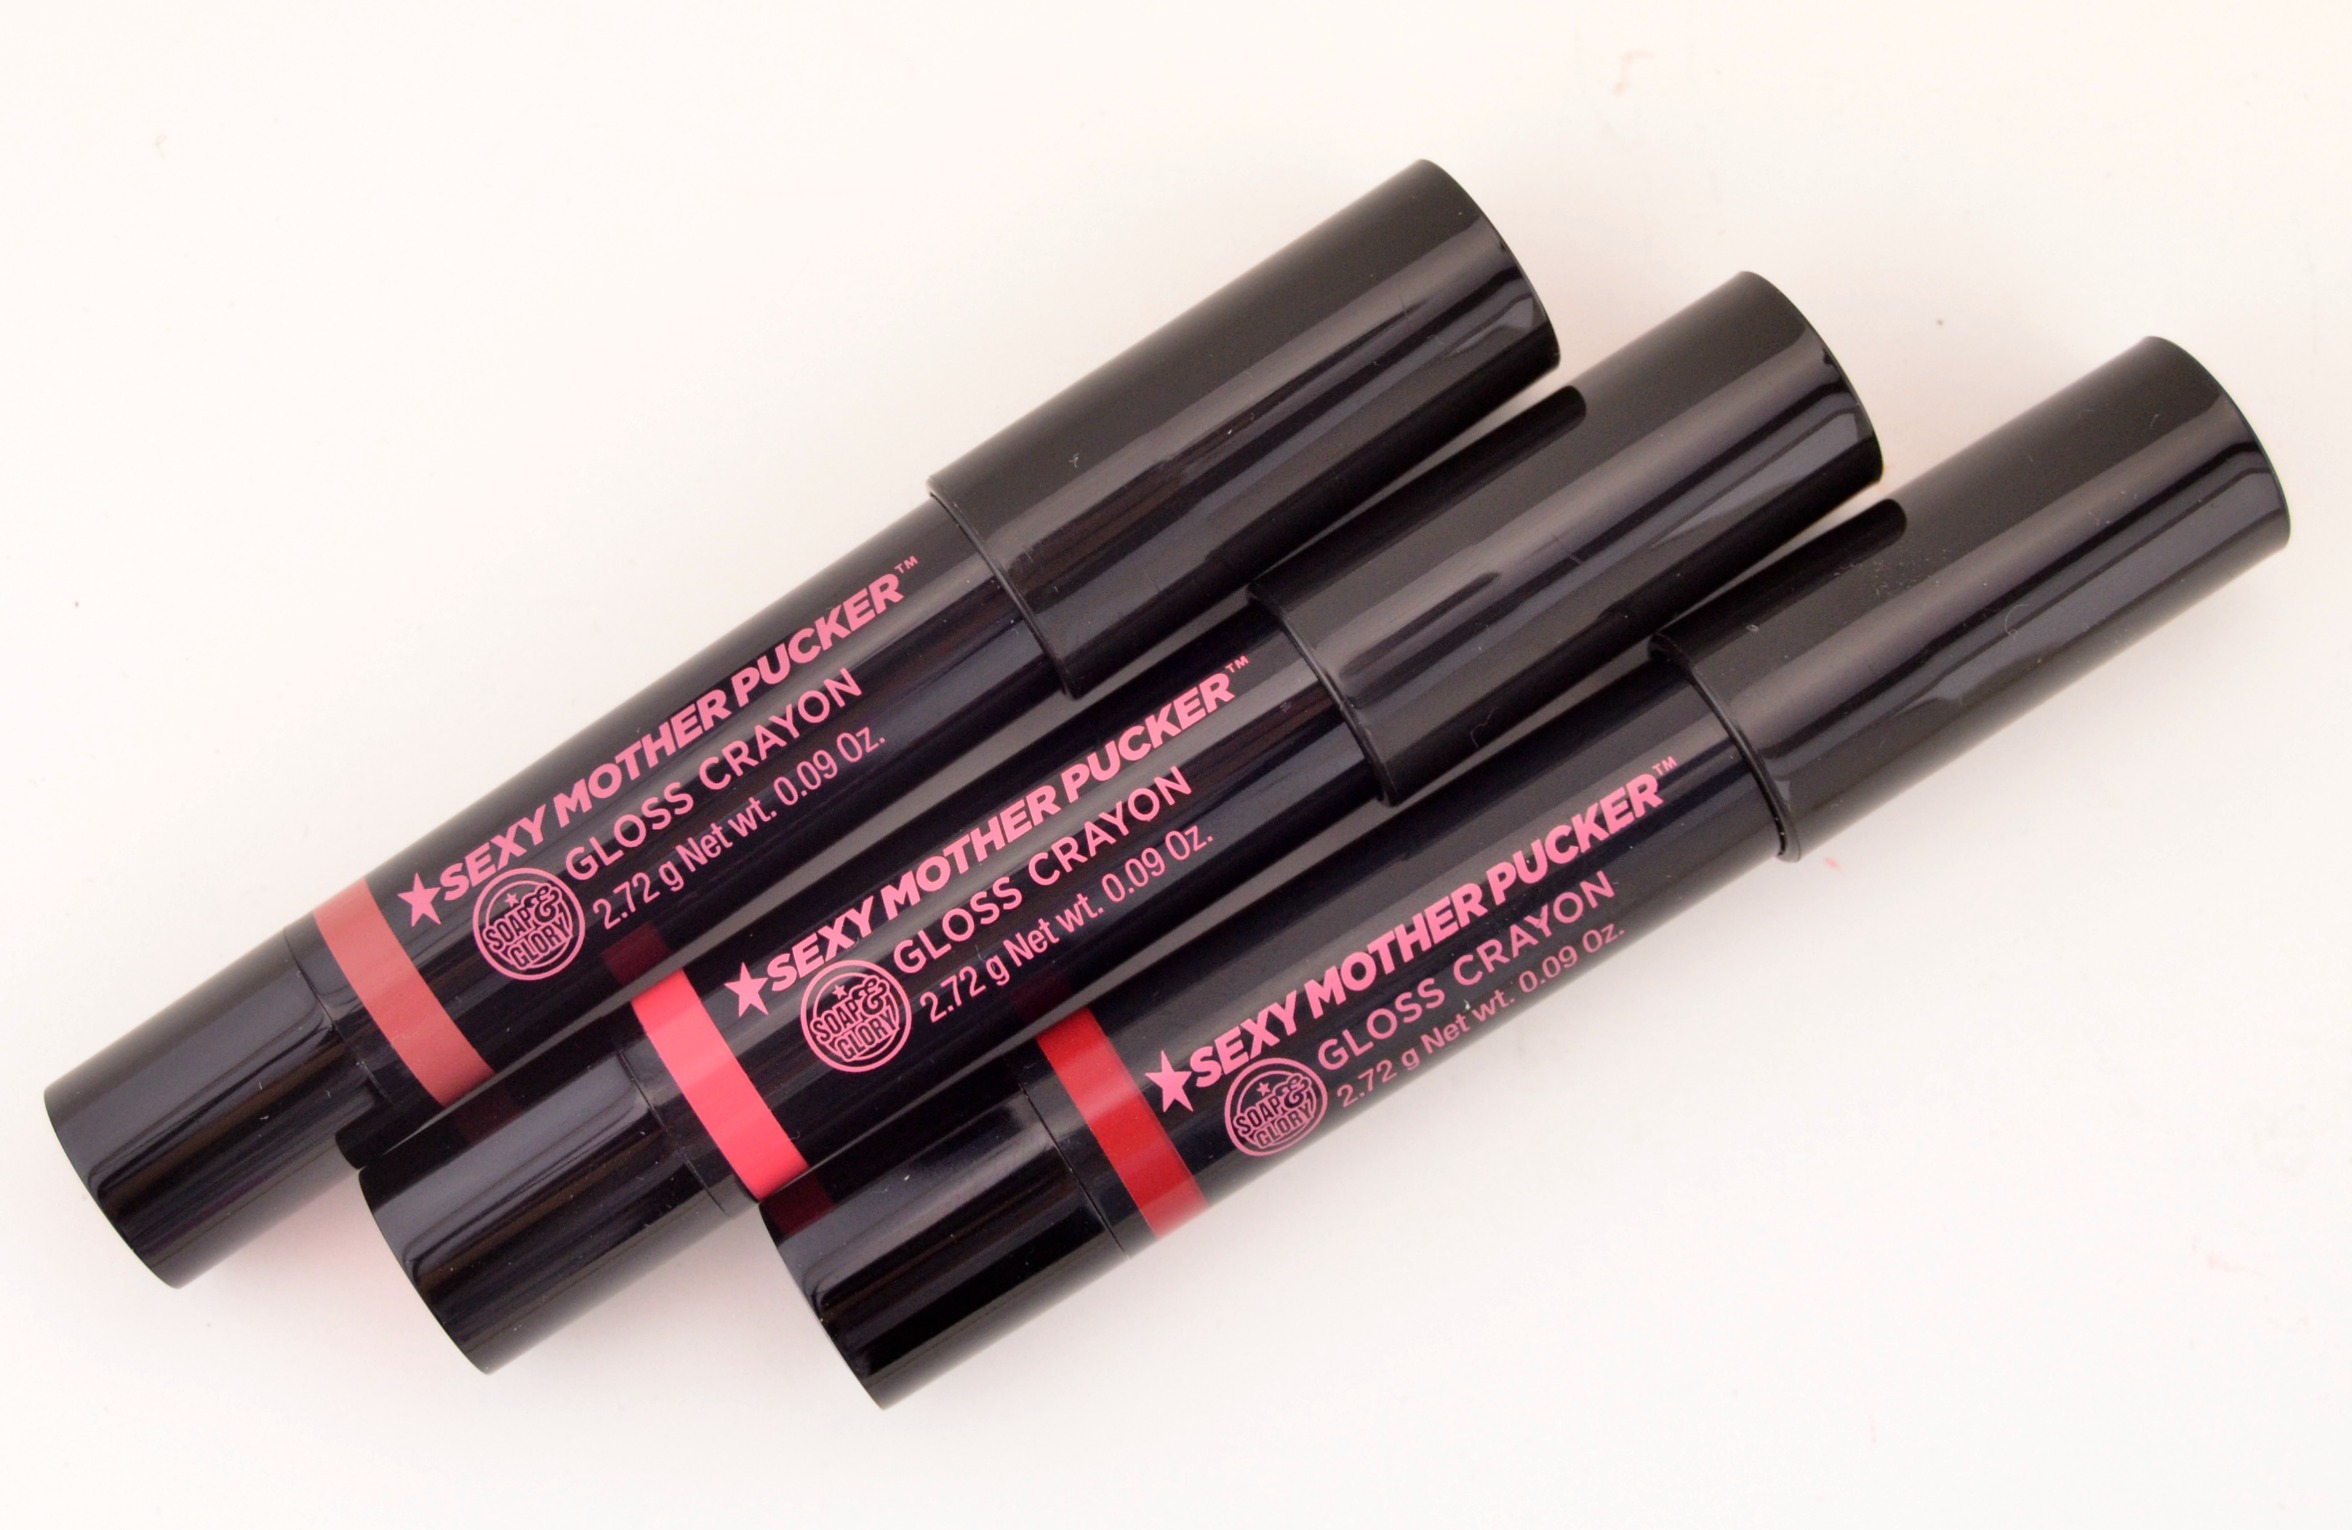 soap and glory pommie girl lipstick